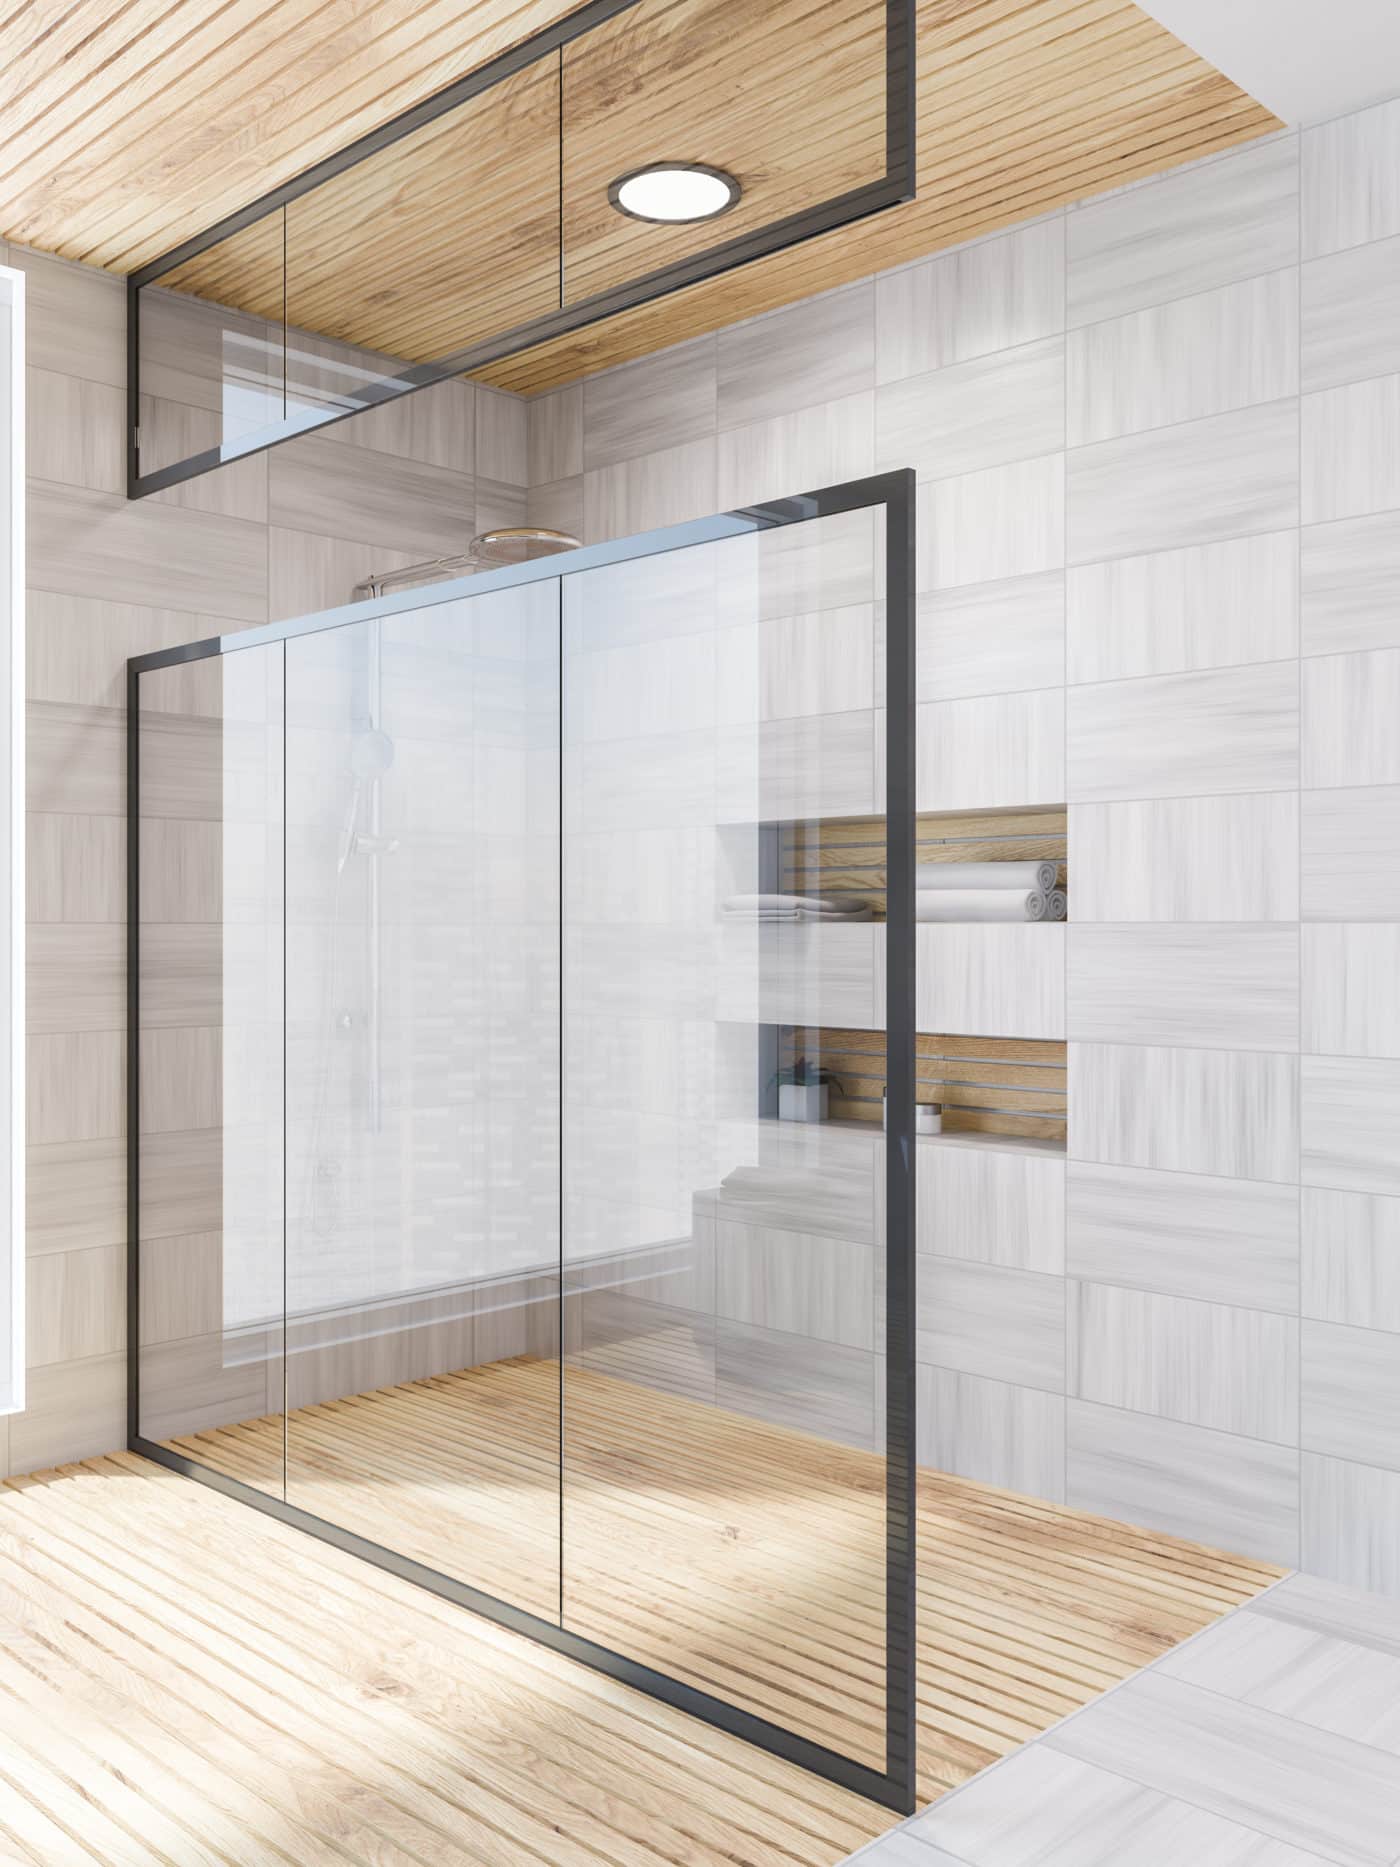 A bathroom with a glass shower door and wooden floors.